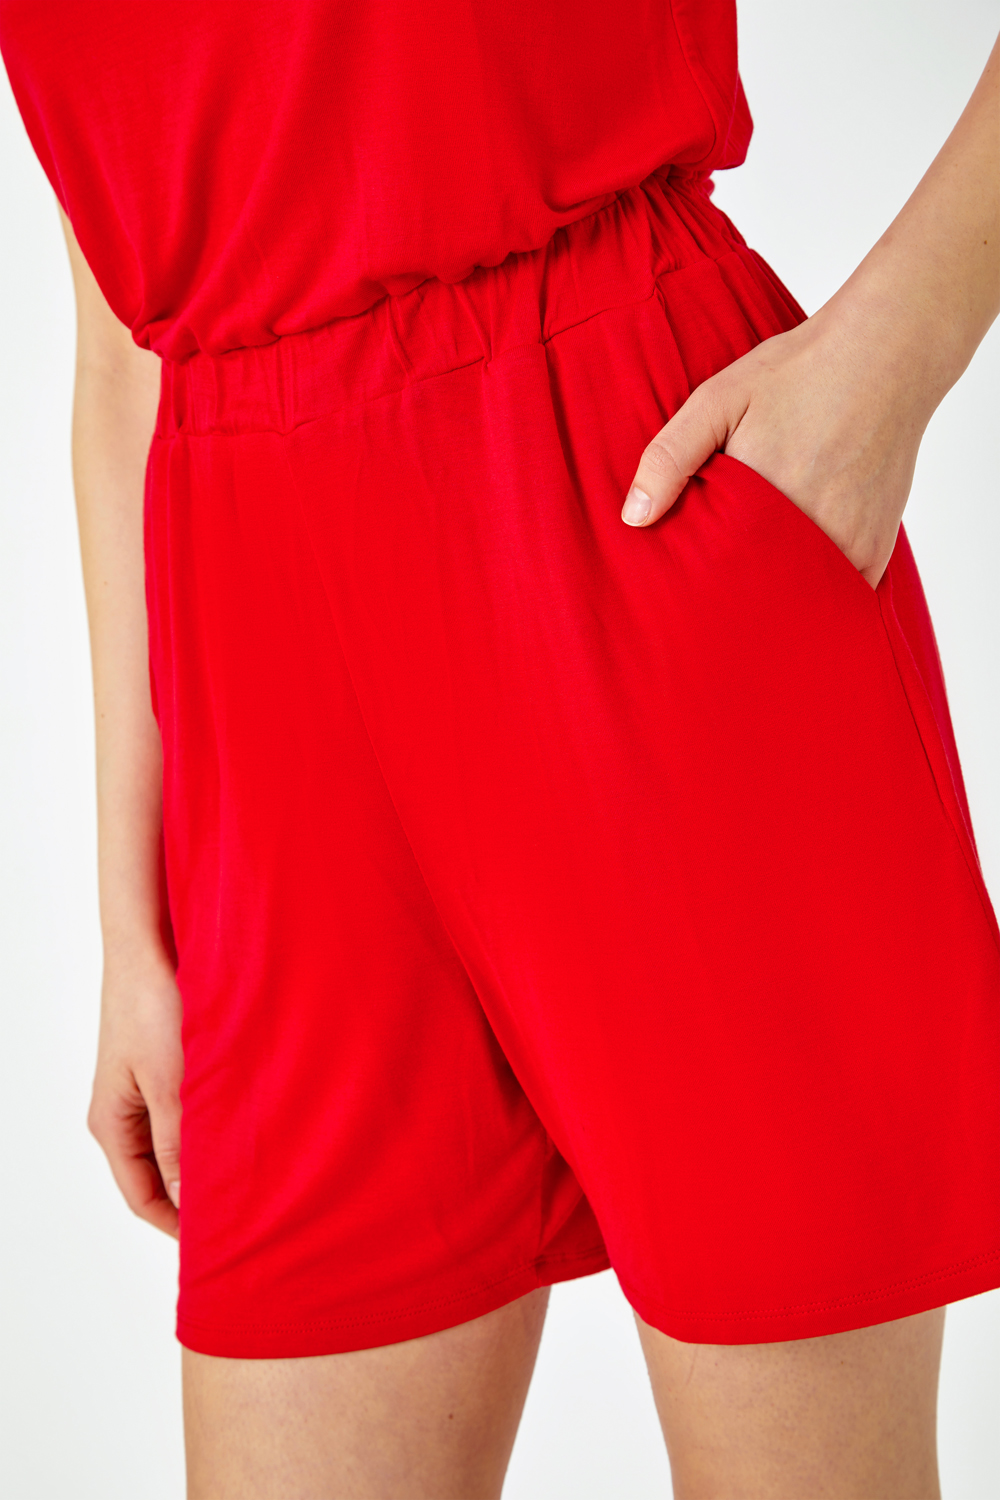 Red Plain Sleeveless Stretch Playsuit, Image 5 of 5